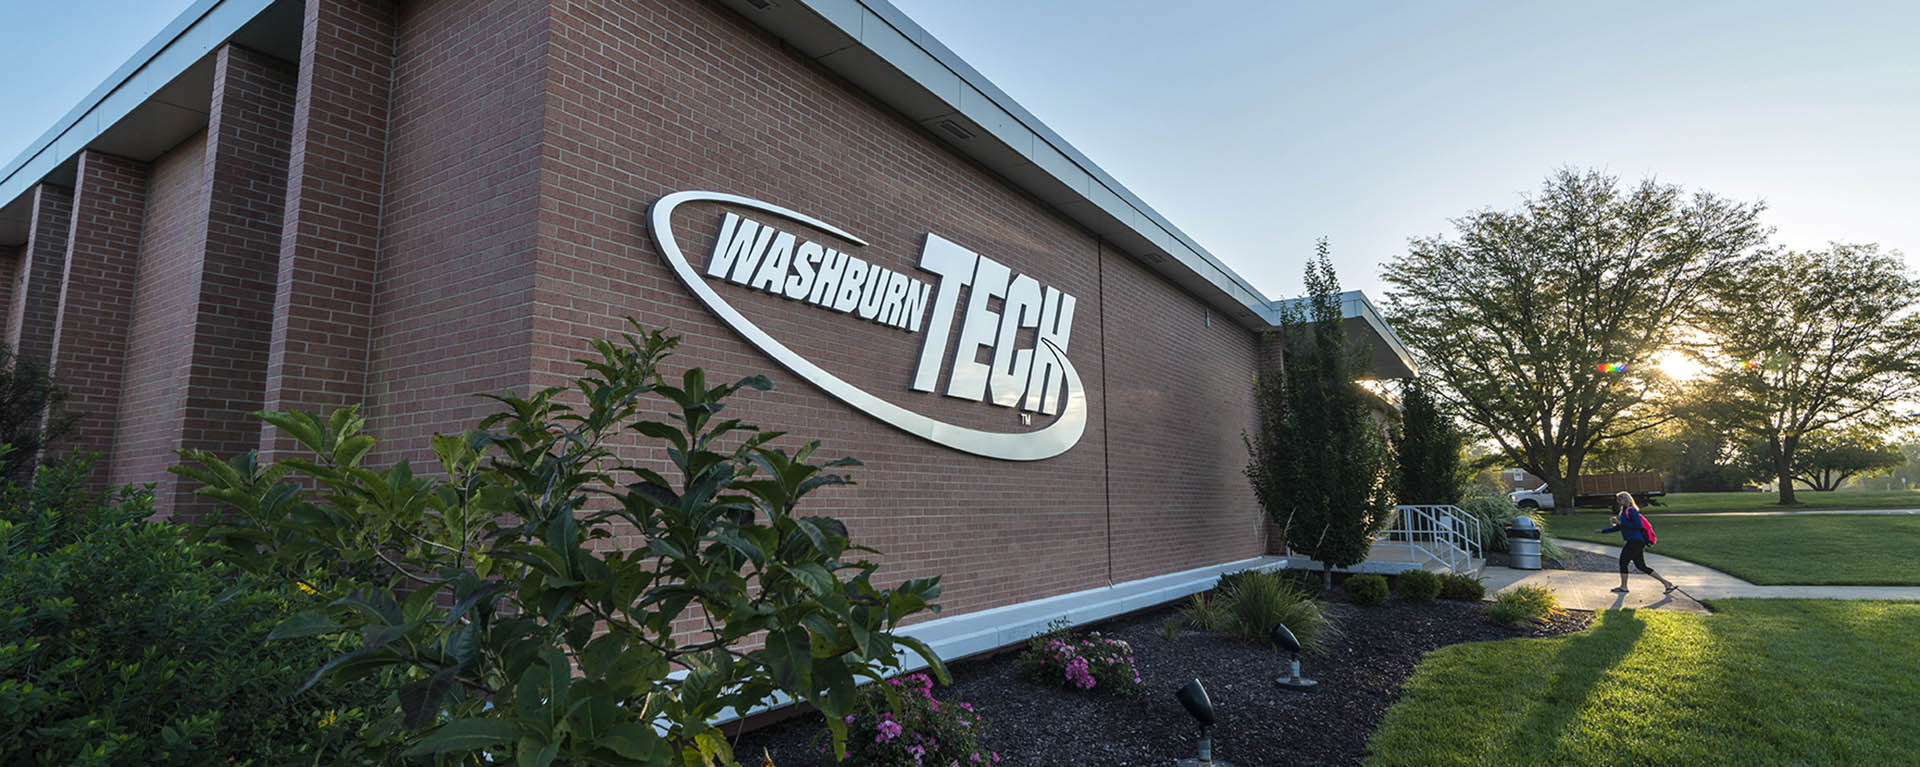 Washburn Tech exterior with sign